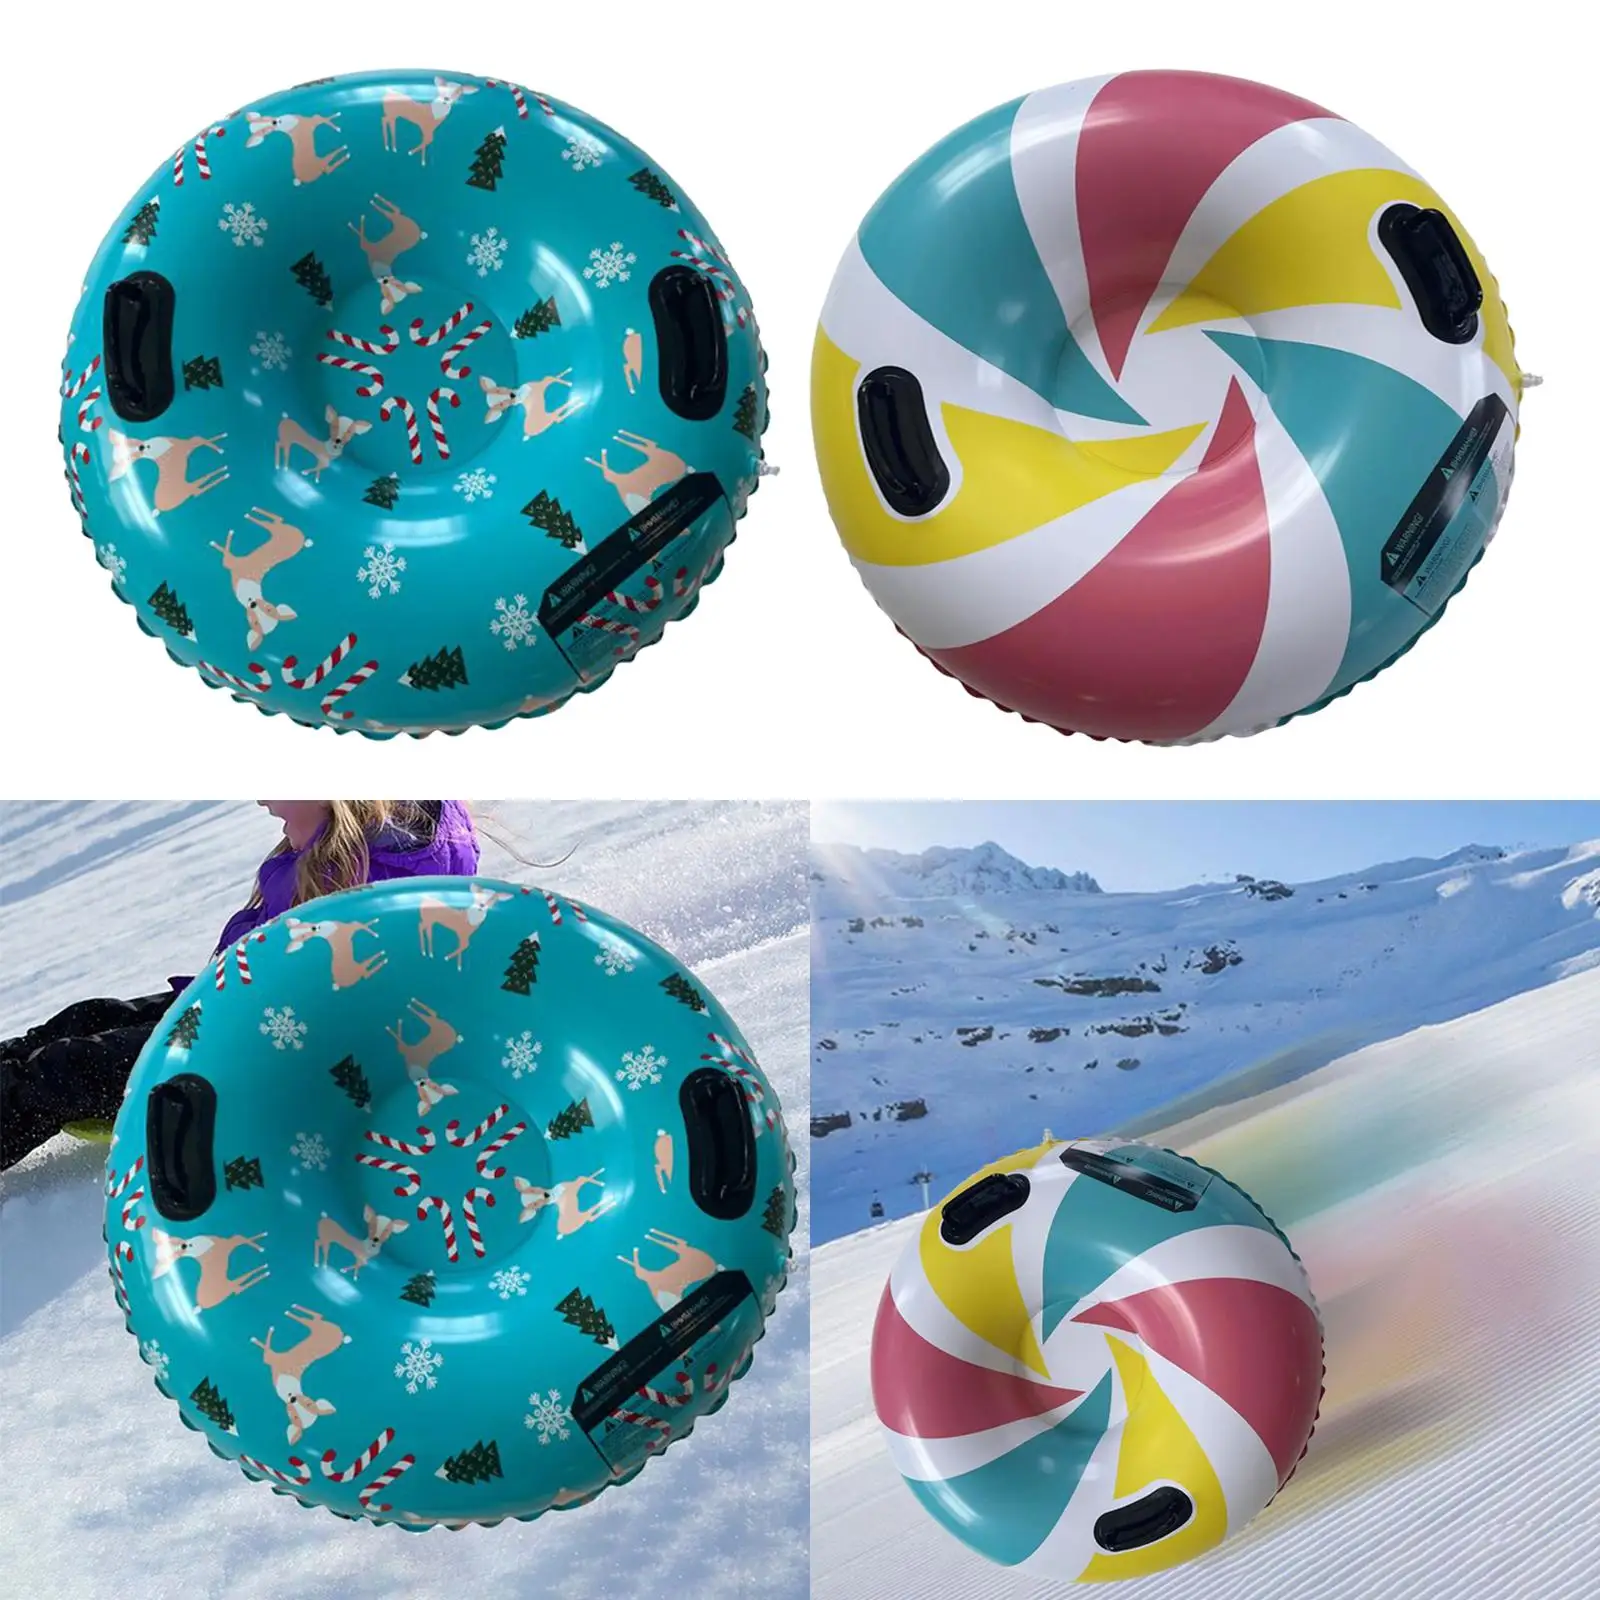 Sturdy winter snow tube easy to carry Diameter 91 cm Snow toys with thick bottom